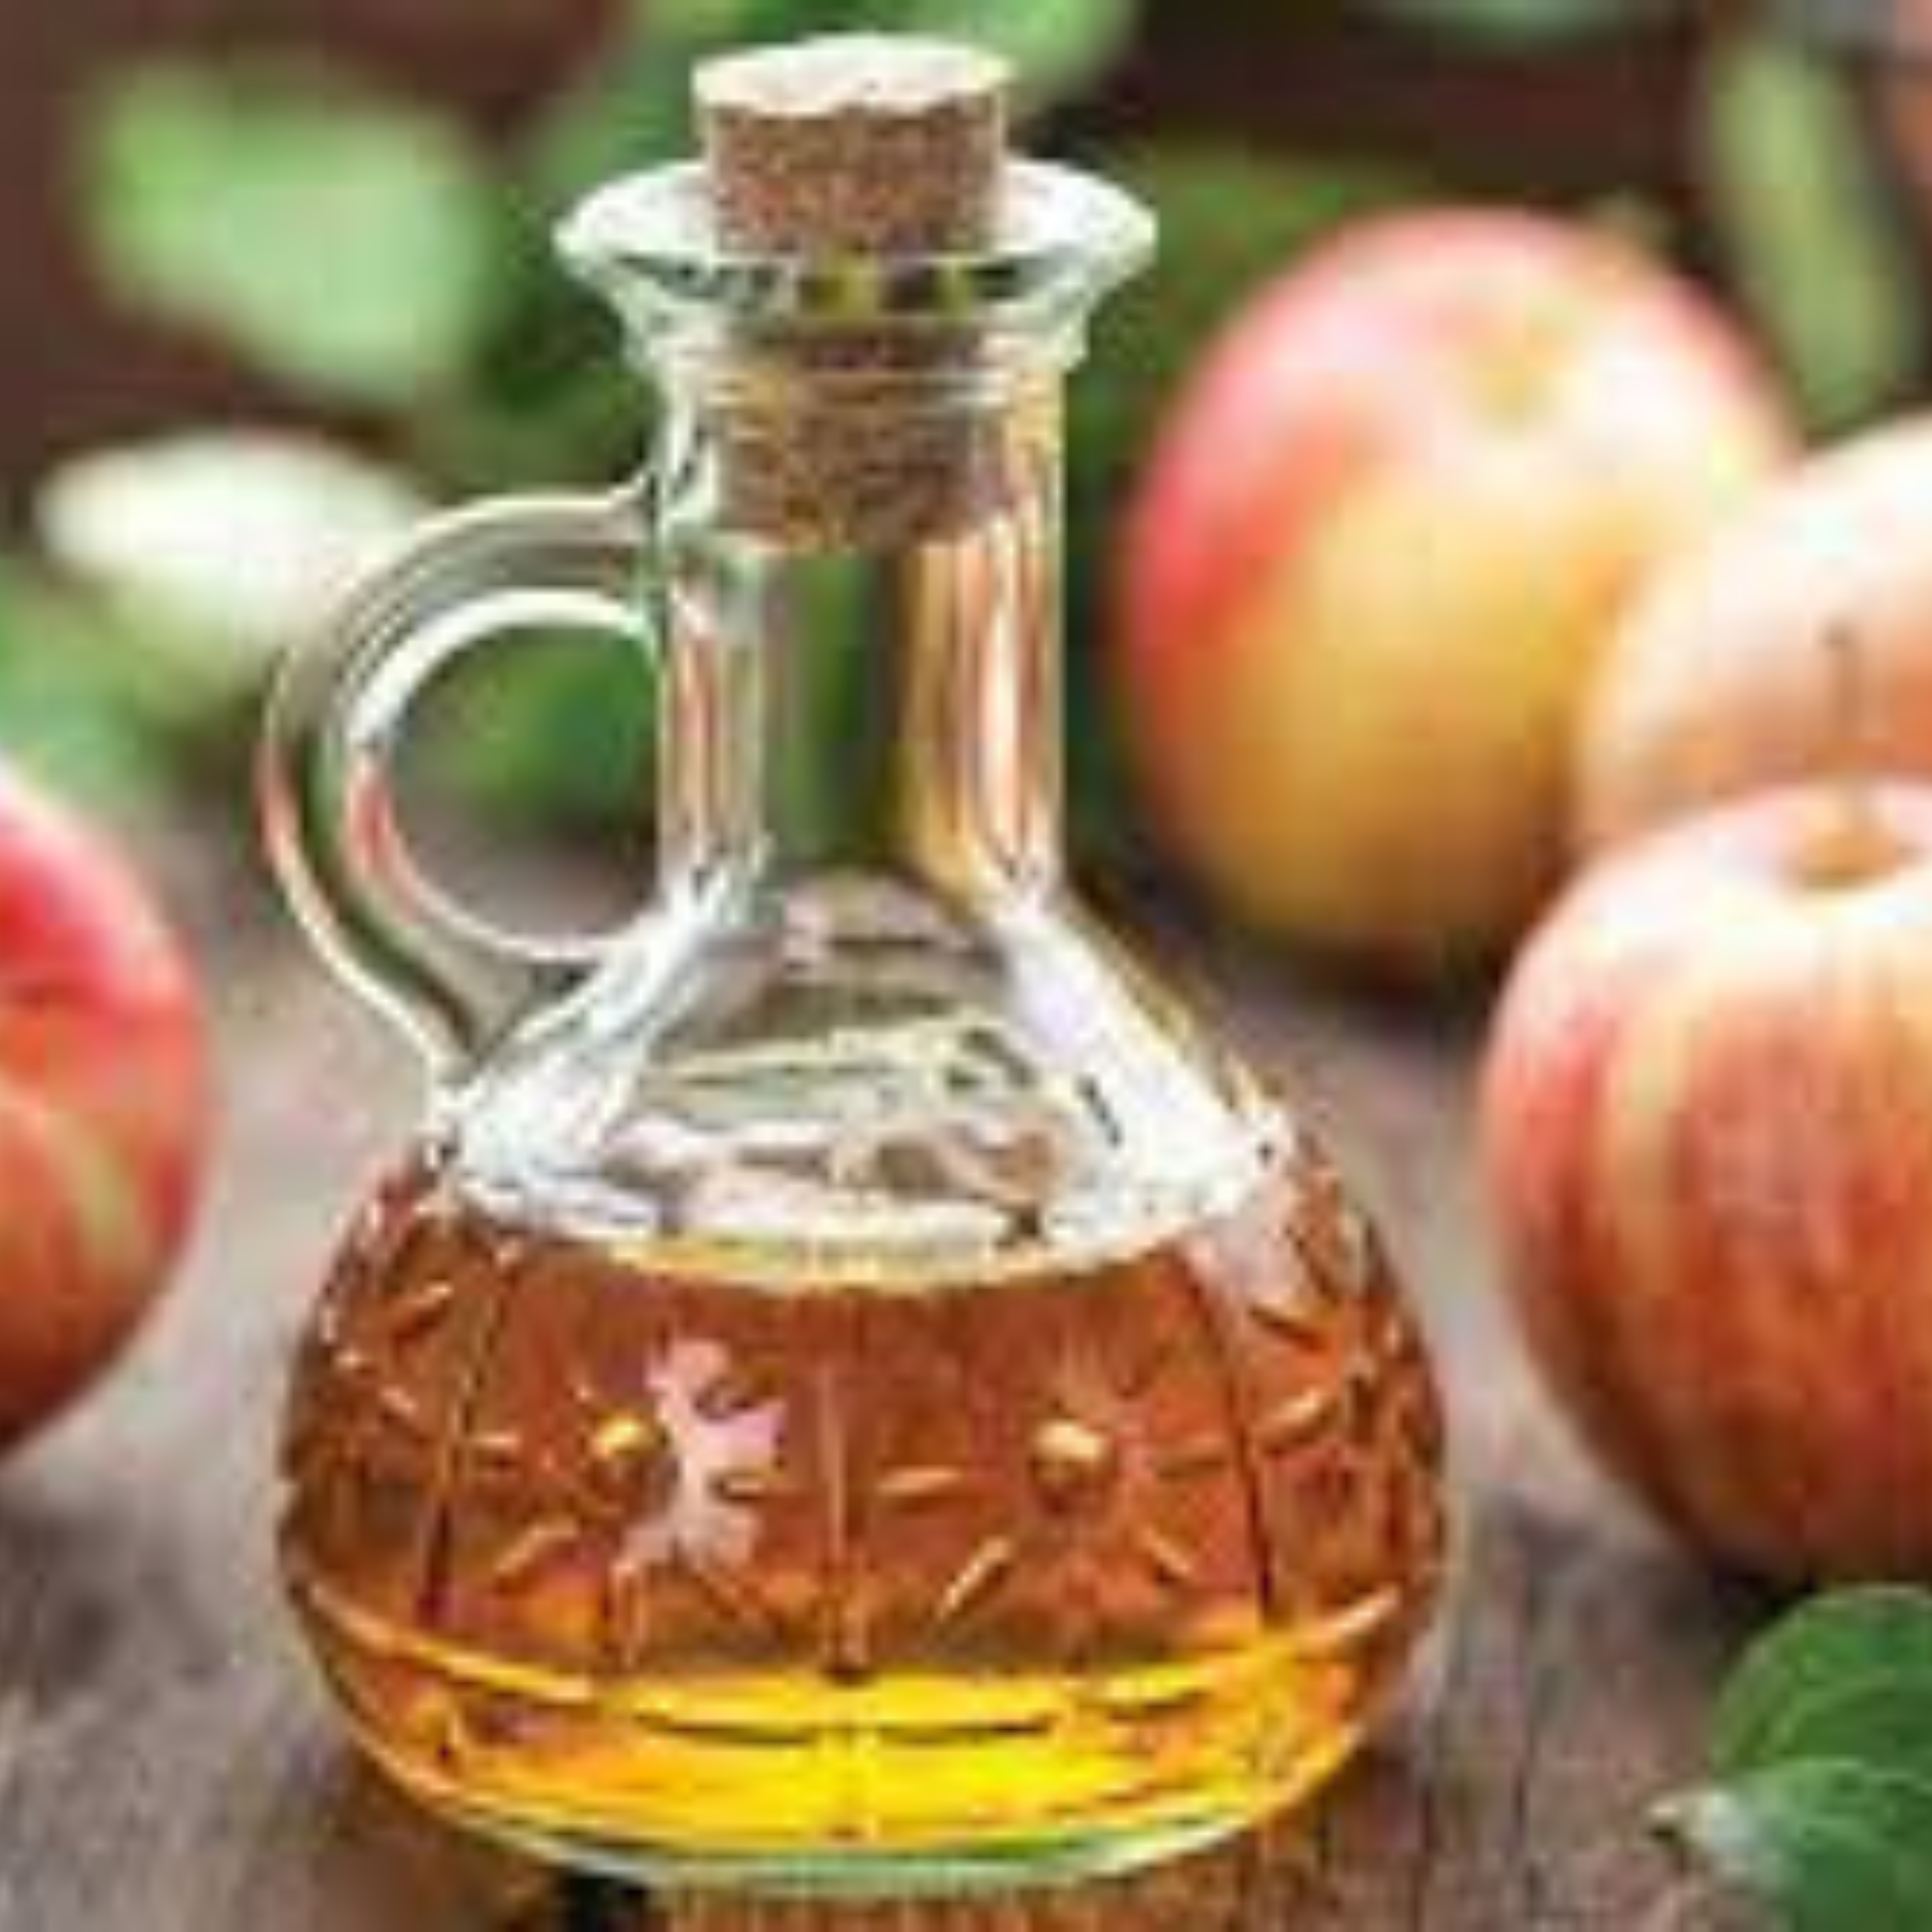 How Effective is Apple Cider Vinegar for Weight Loss?